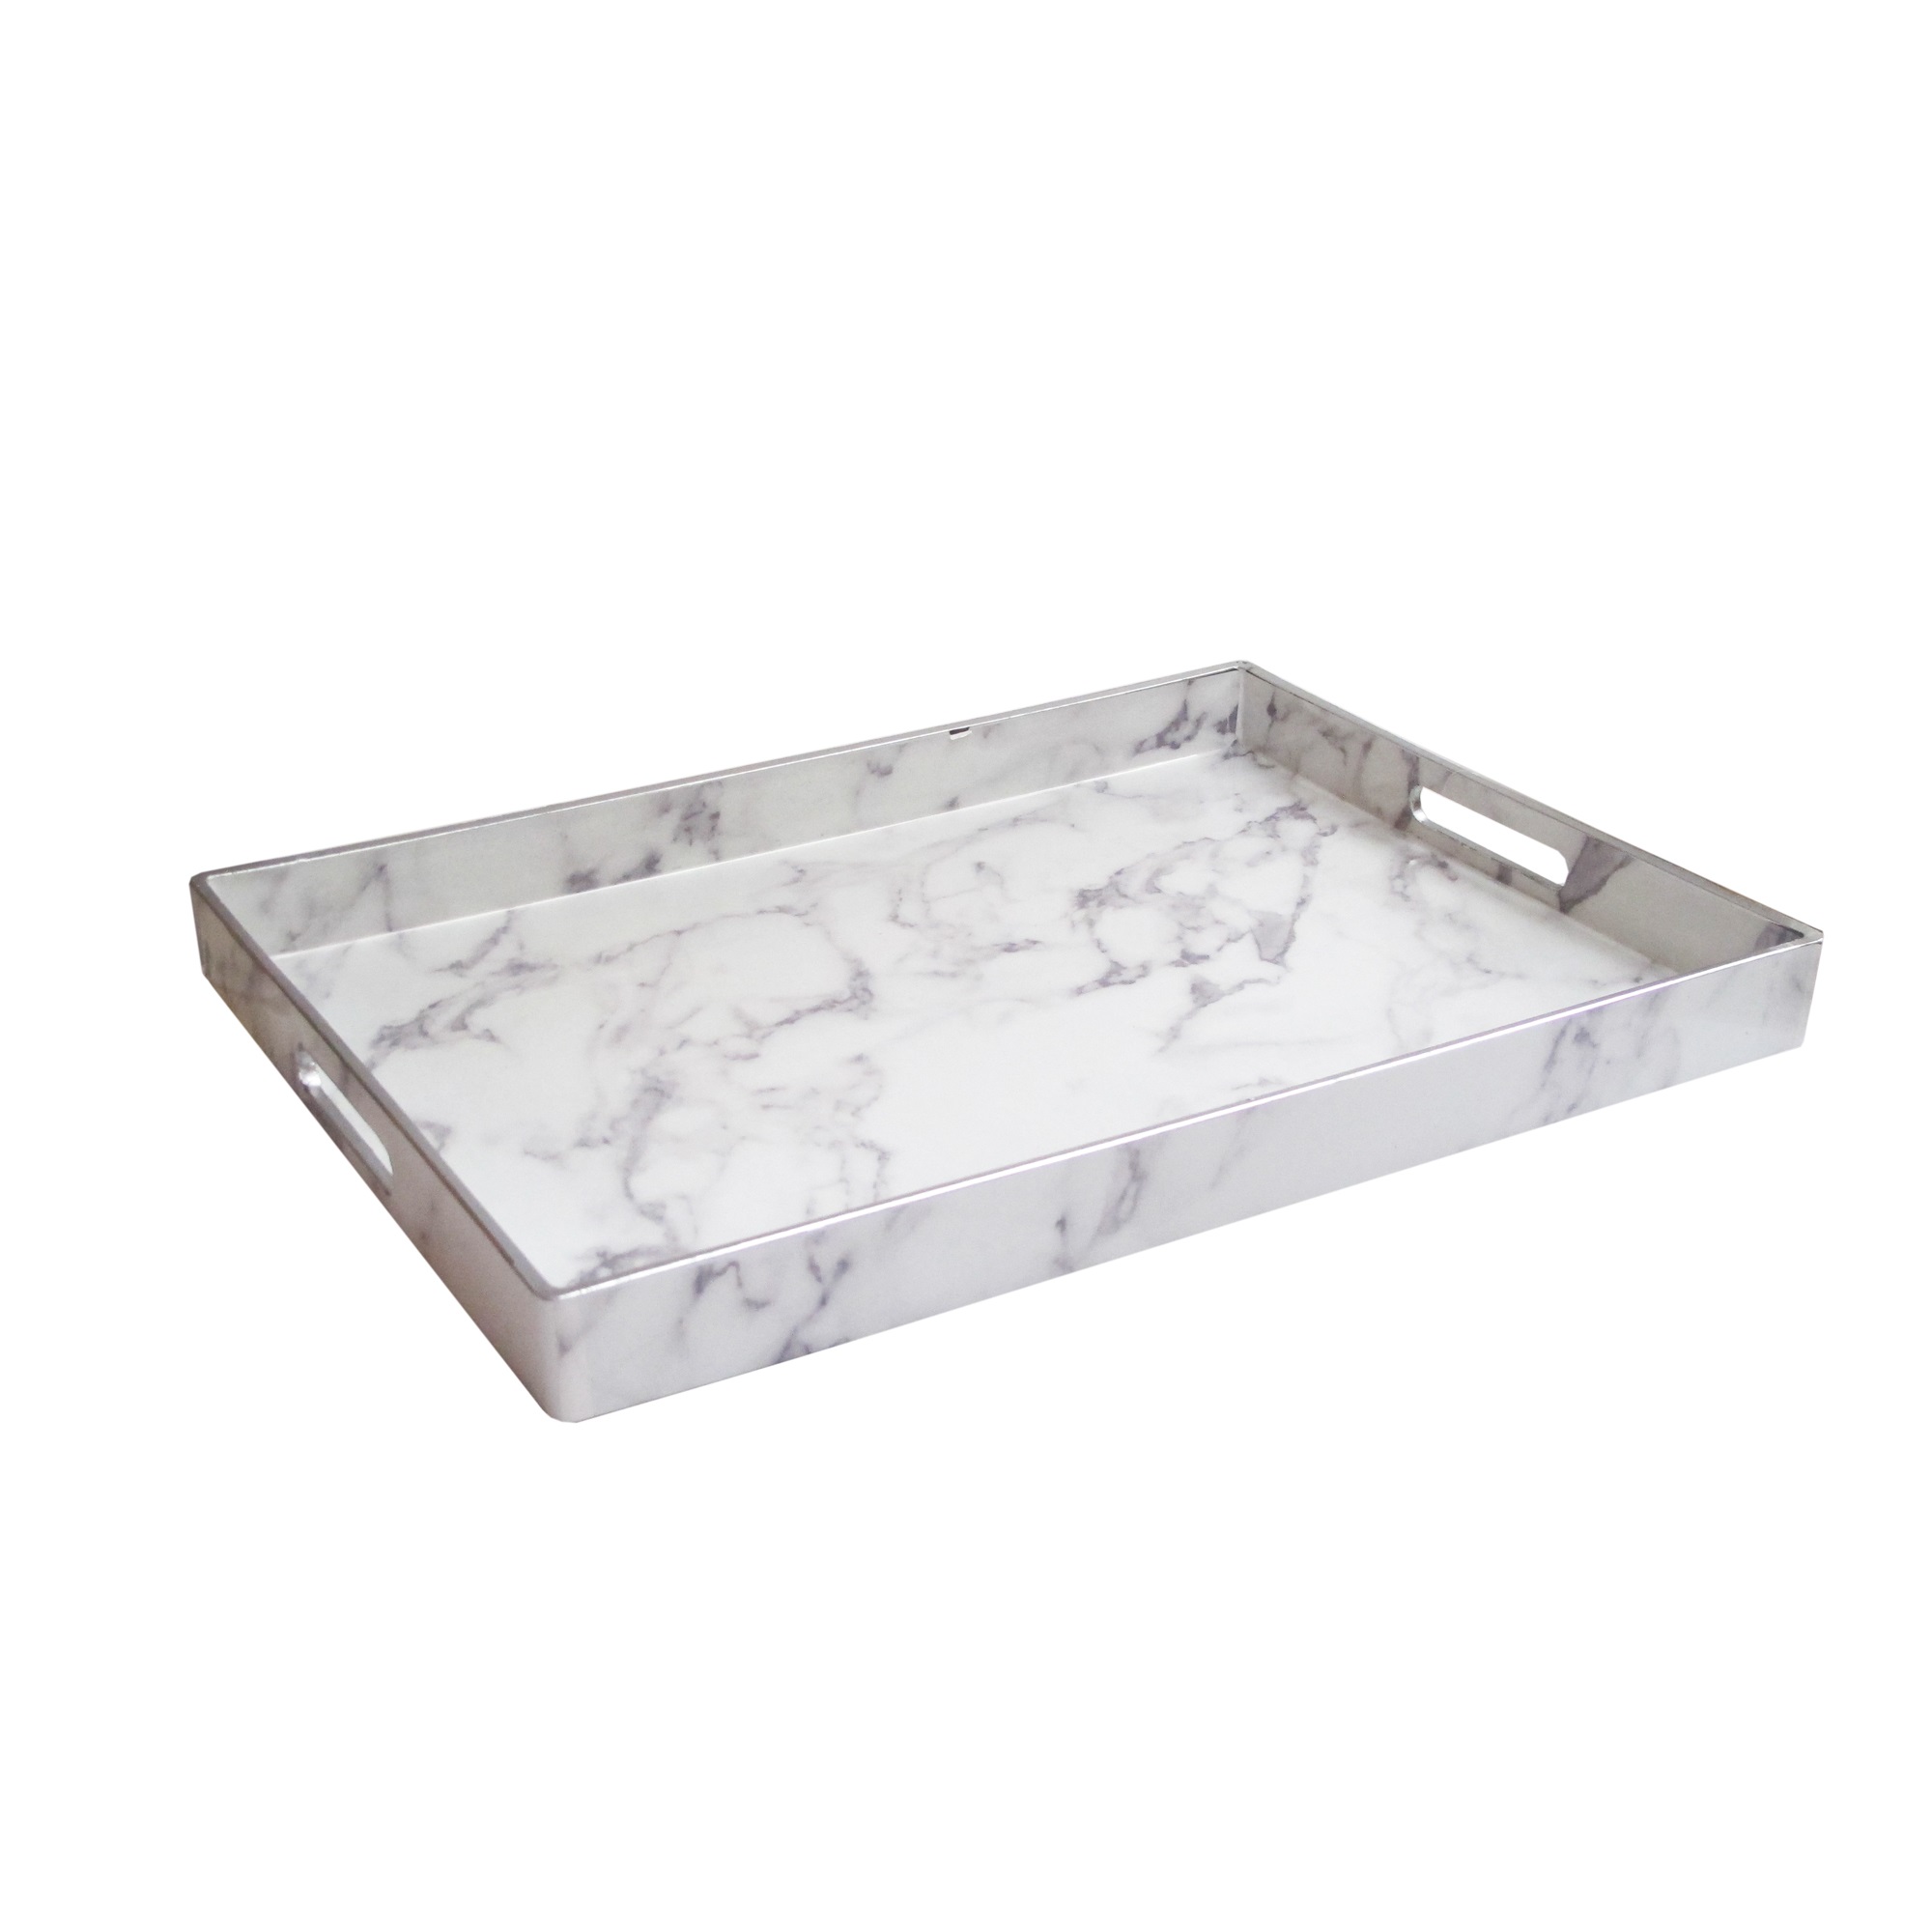 American Atelier, Marble White Gray, Rectangular, Polypropylene Serving Tray with Handles, 14X19" - image 1 of 6